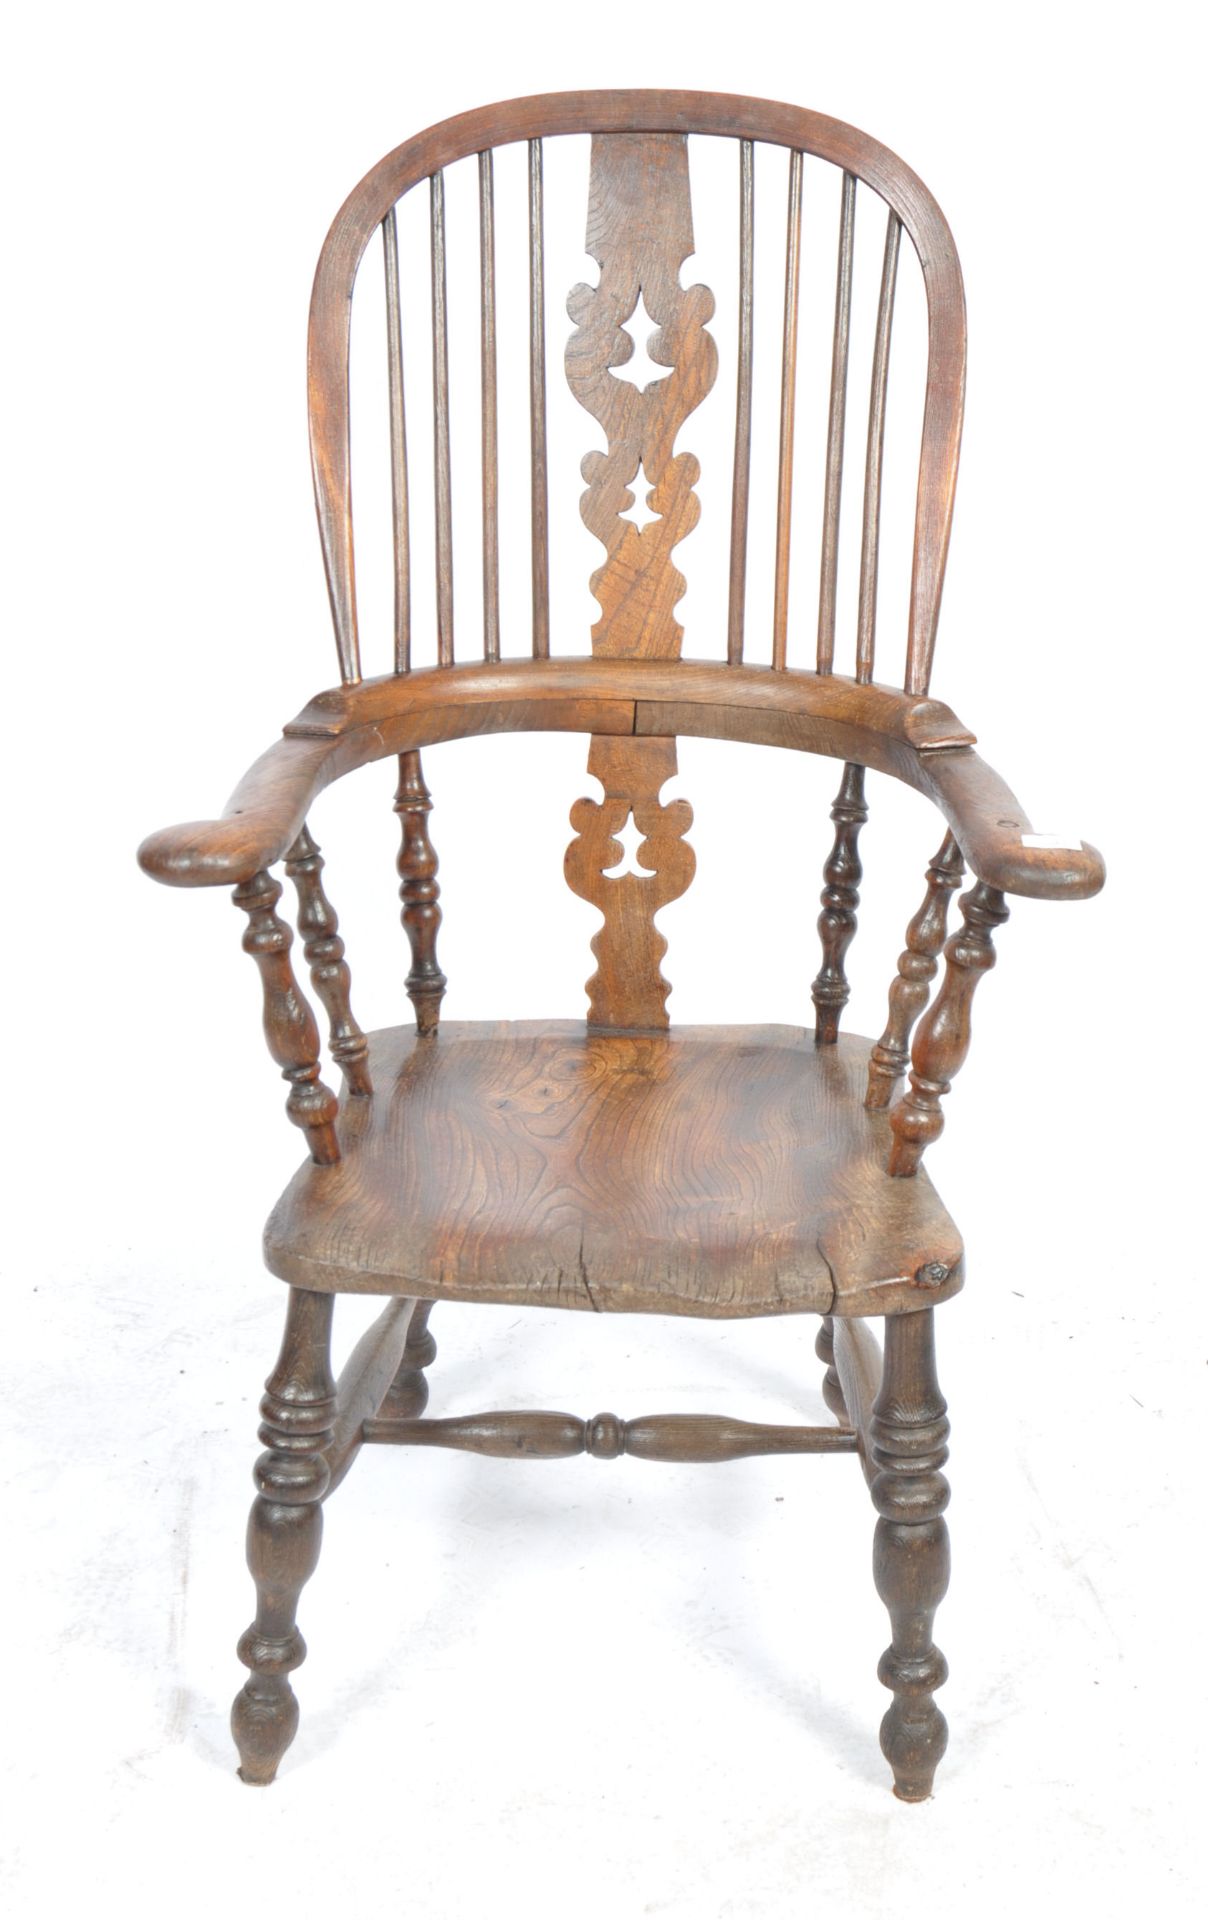 19TH CENTURY ENGLISH ANTIQUE YEW WOOD WINDSOR CARVER CHAIR - Image 4 of 6